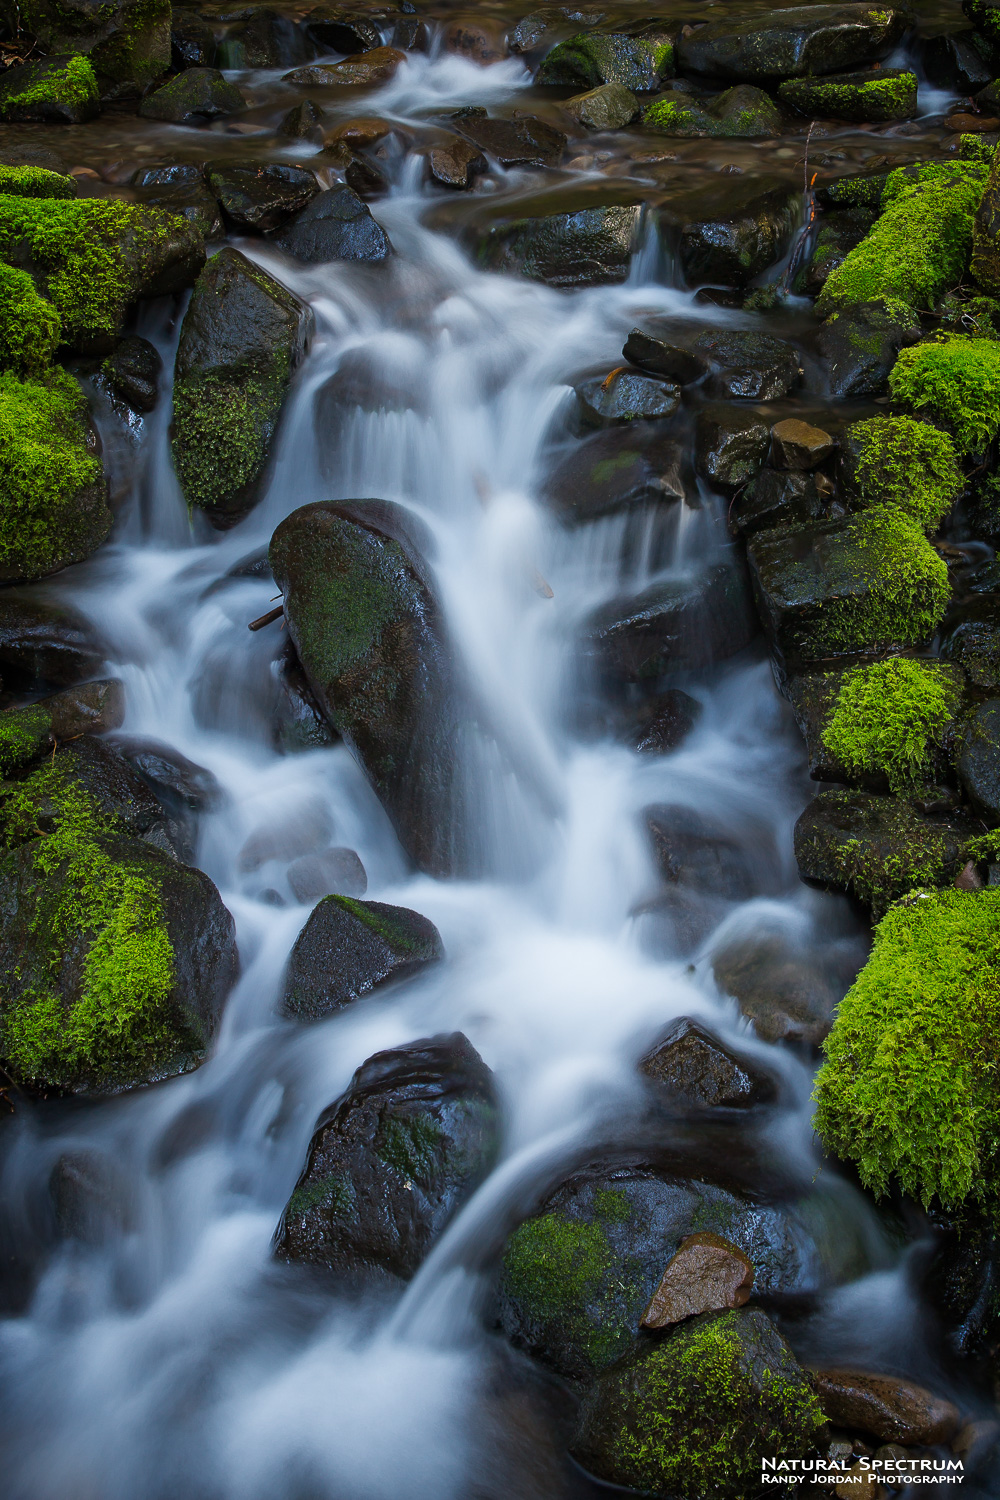 Cascading waters along a small tributary stream for the Sol Duc River, Olympic National Park, Washington.